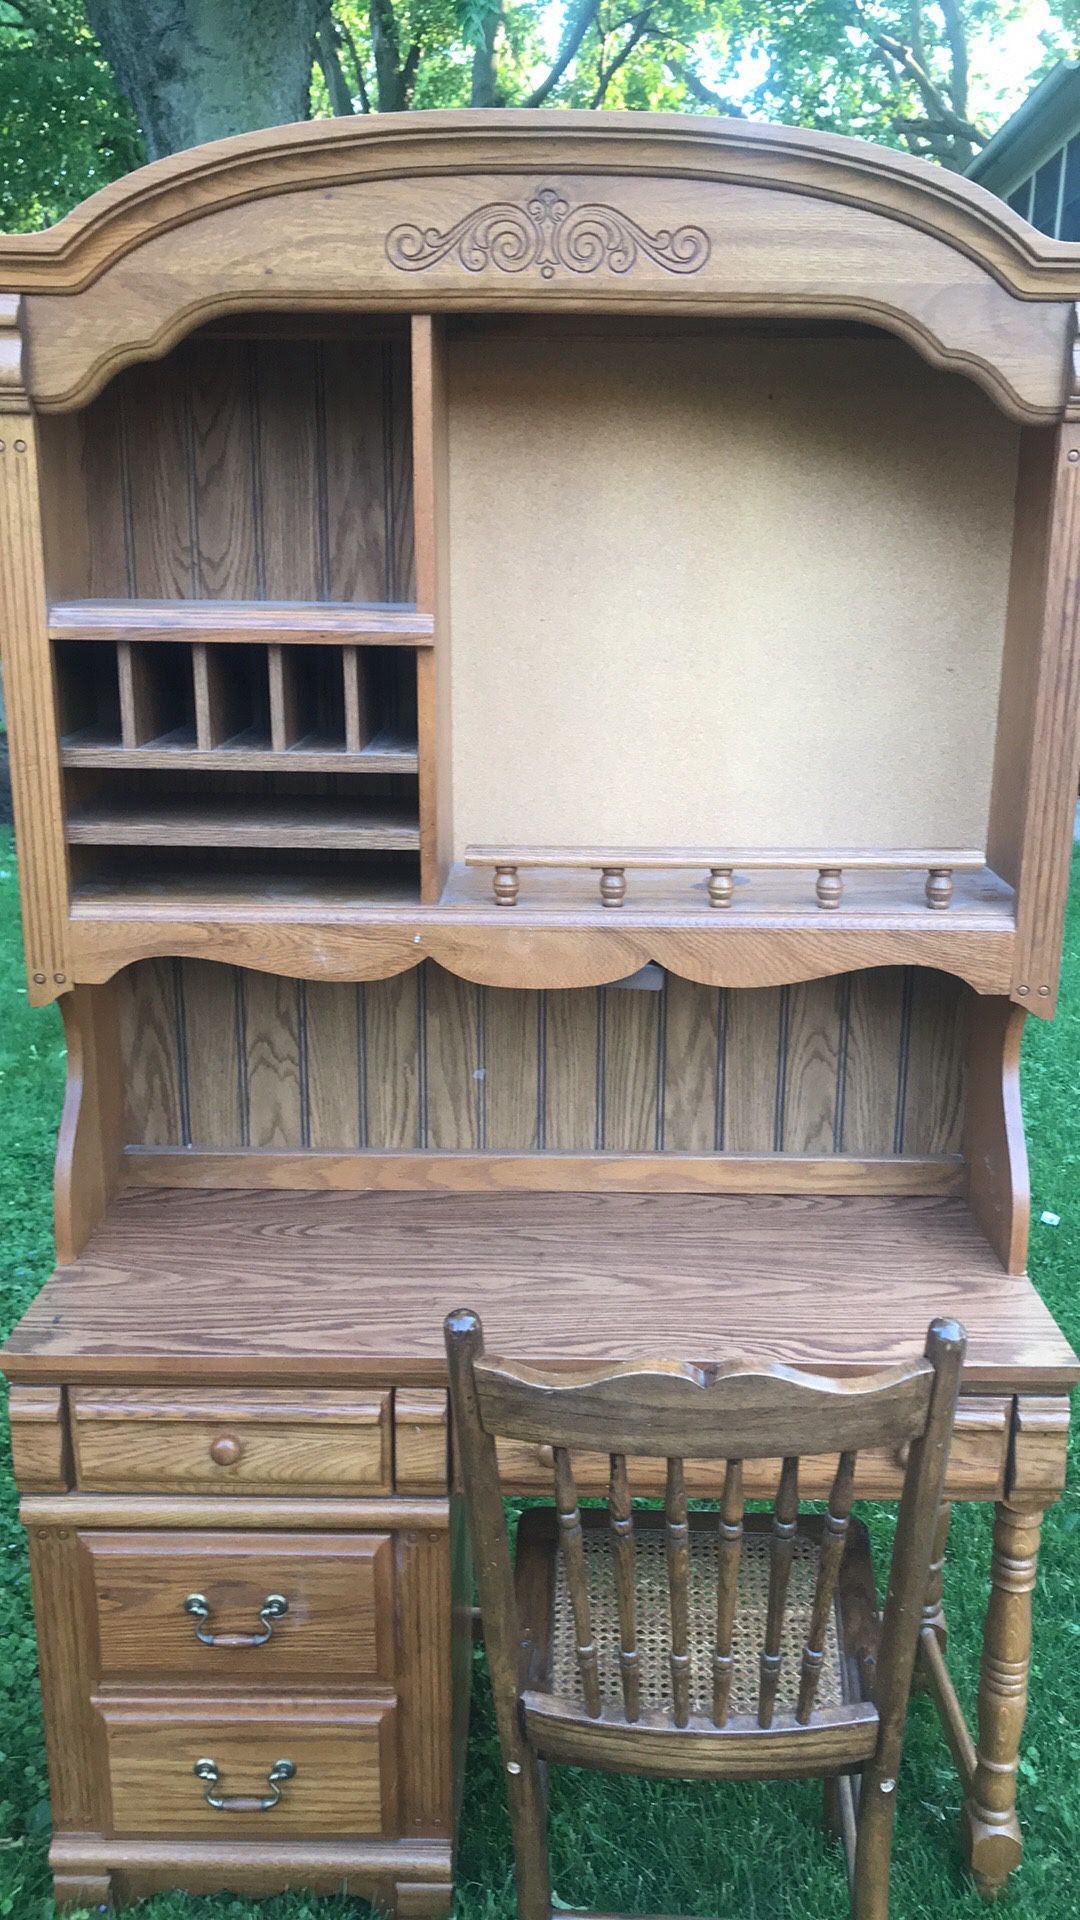 Price Reduction. Antique style sturdy wooden desk with top hutch.